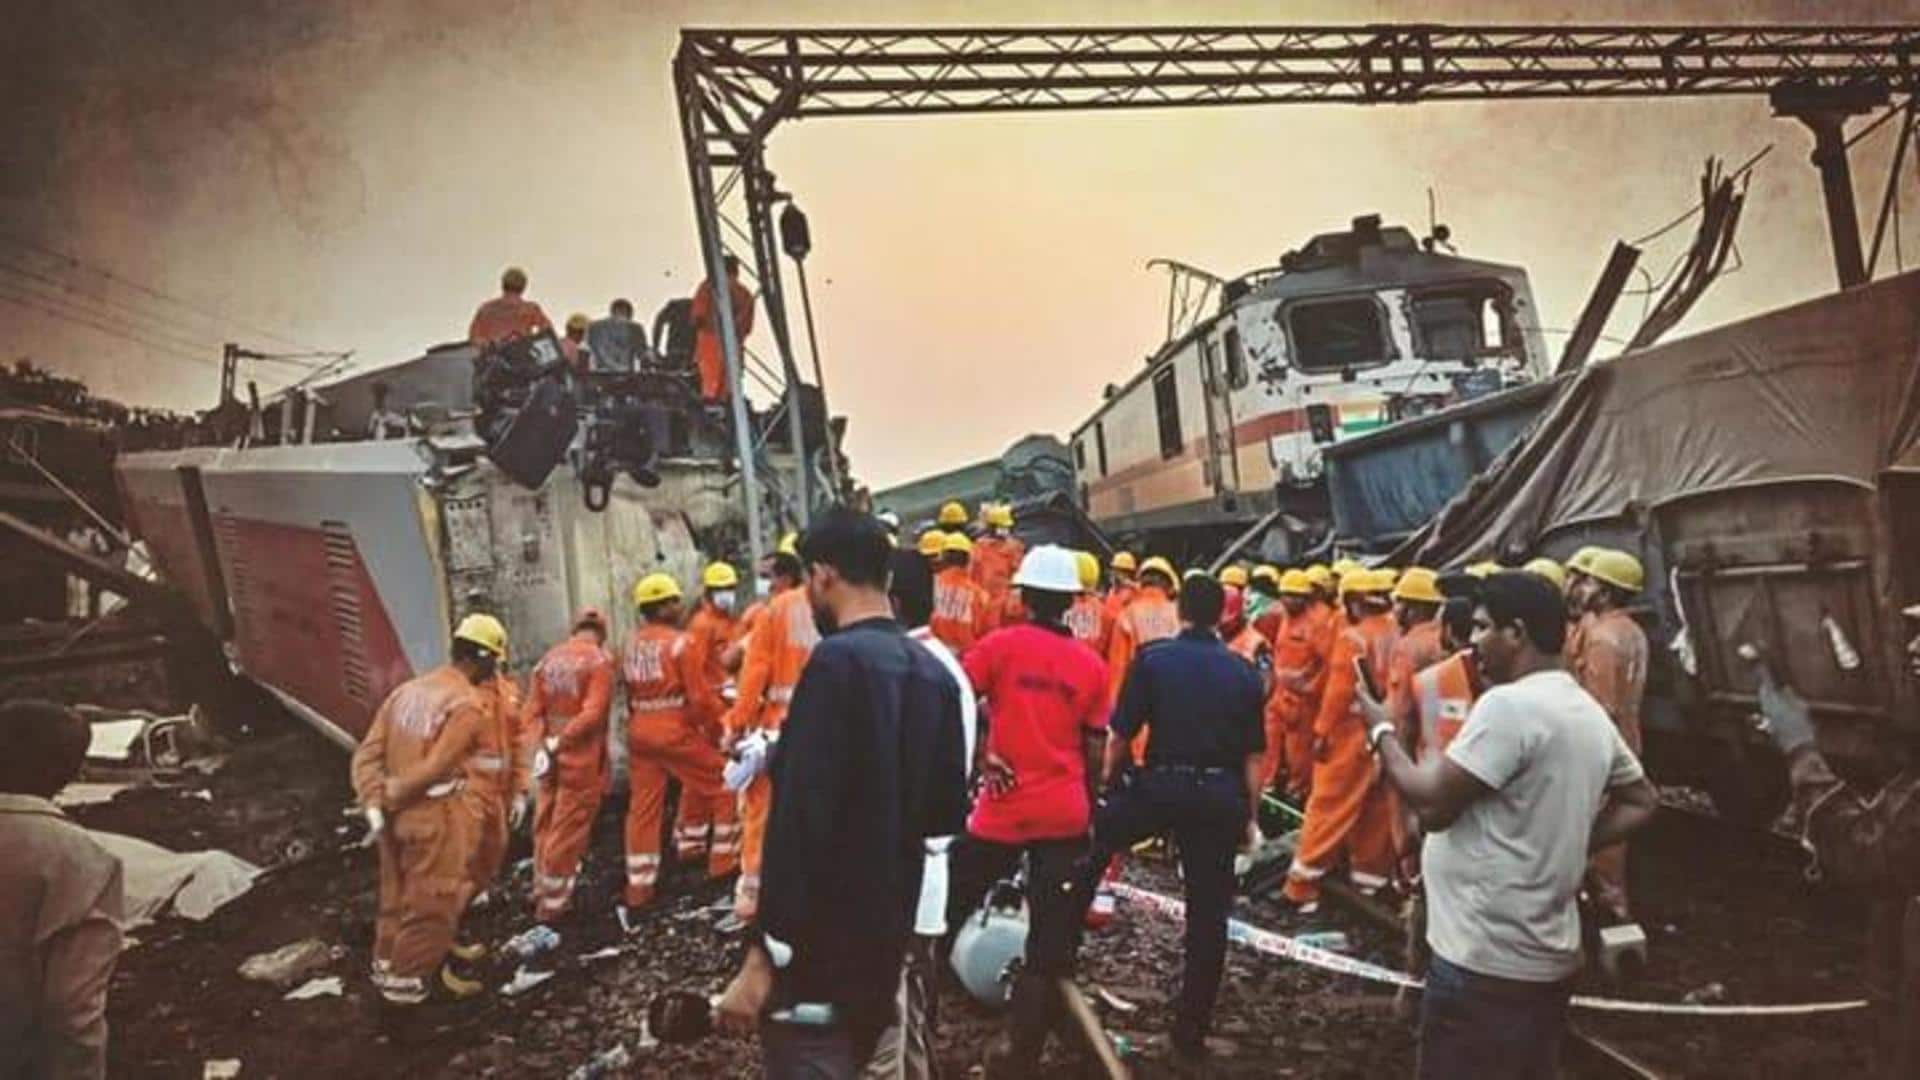 Odisha train tragedy: Wrong signaling led to collision, says report